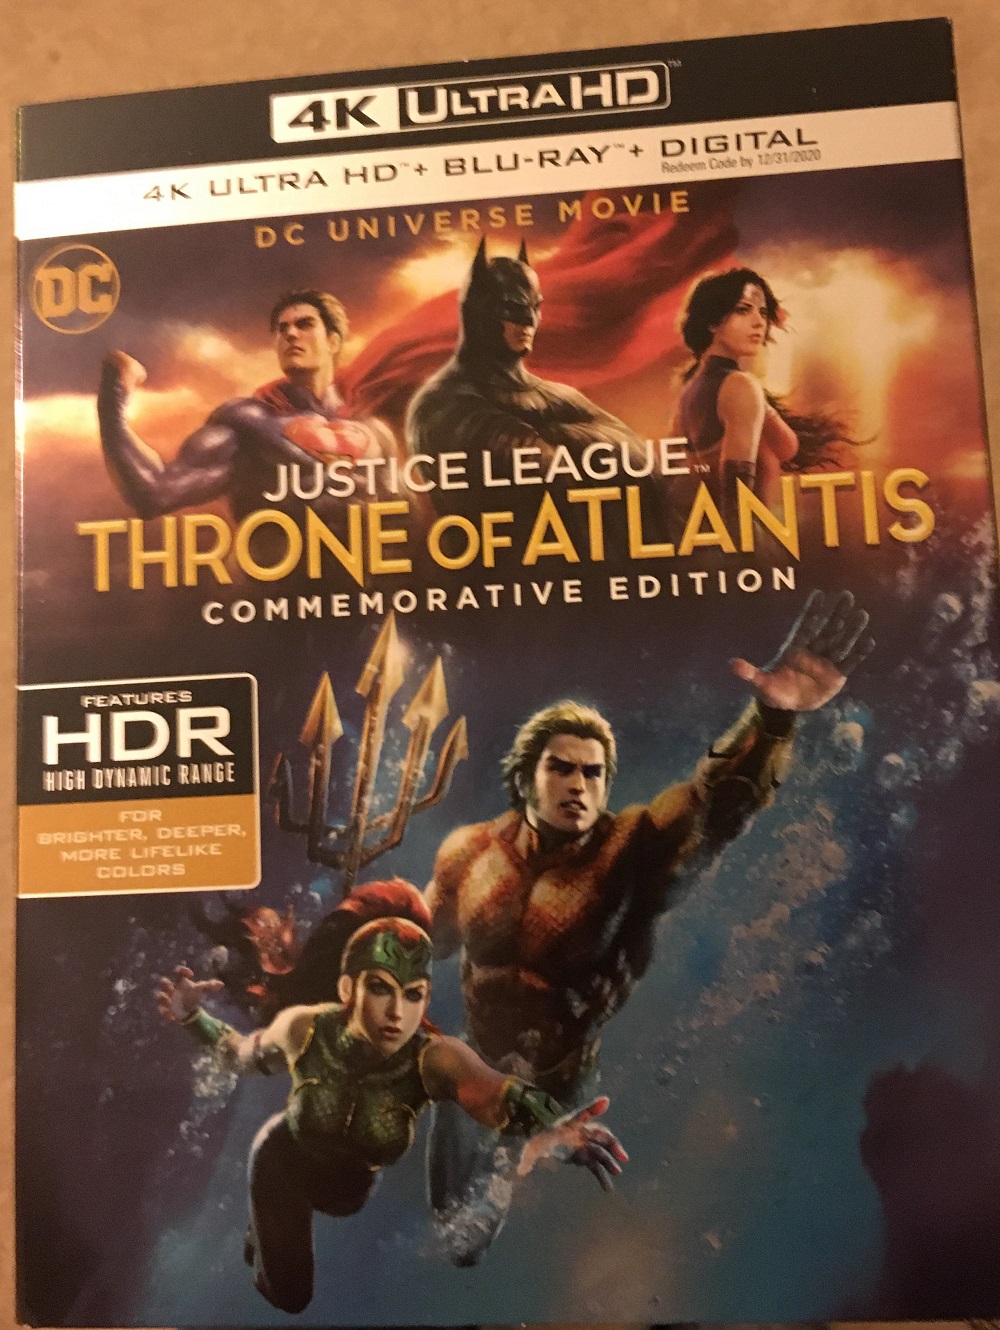 Justice League Throne of Atlantis Commemorative Edition 4K Ultra HD Blu-ray review